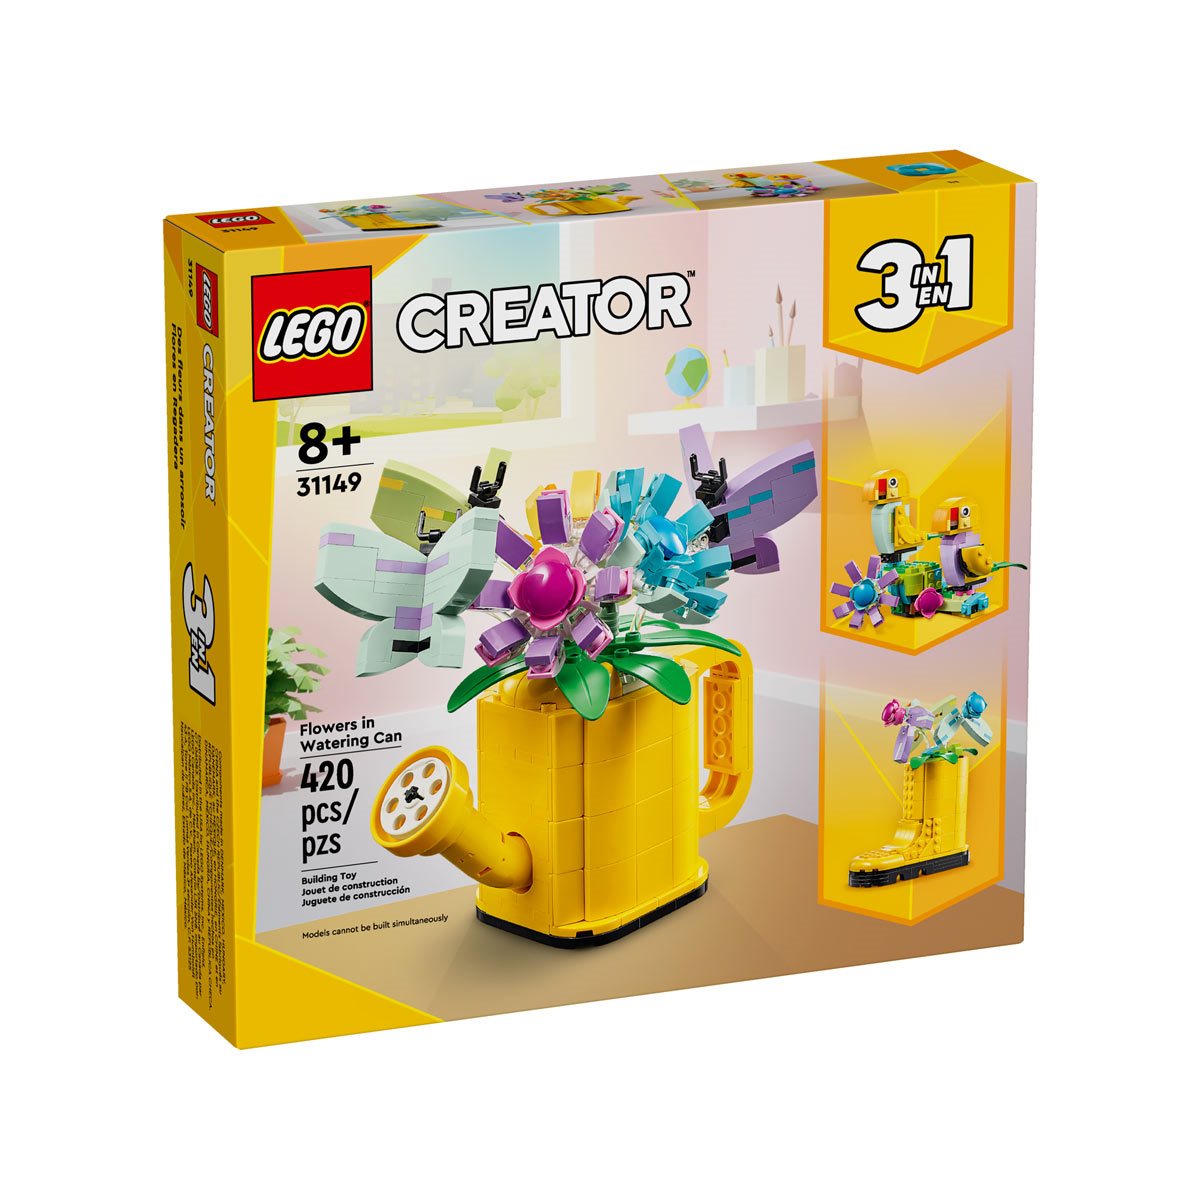 What is LEGO ® Creator 3in1?